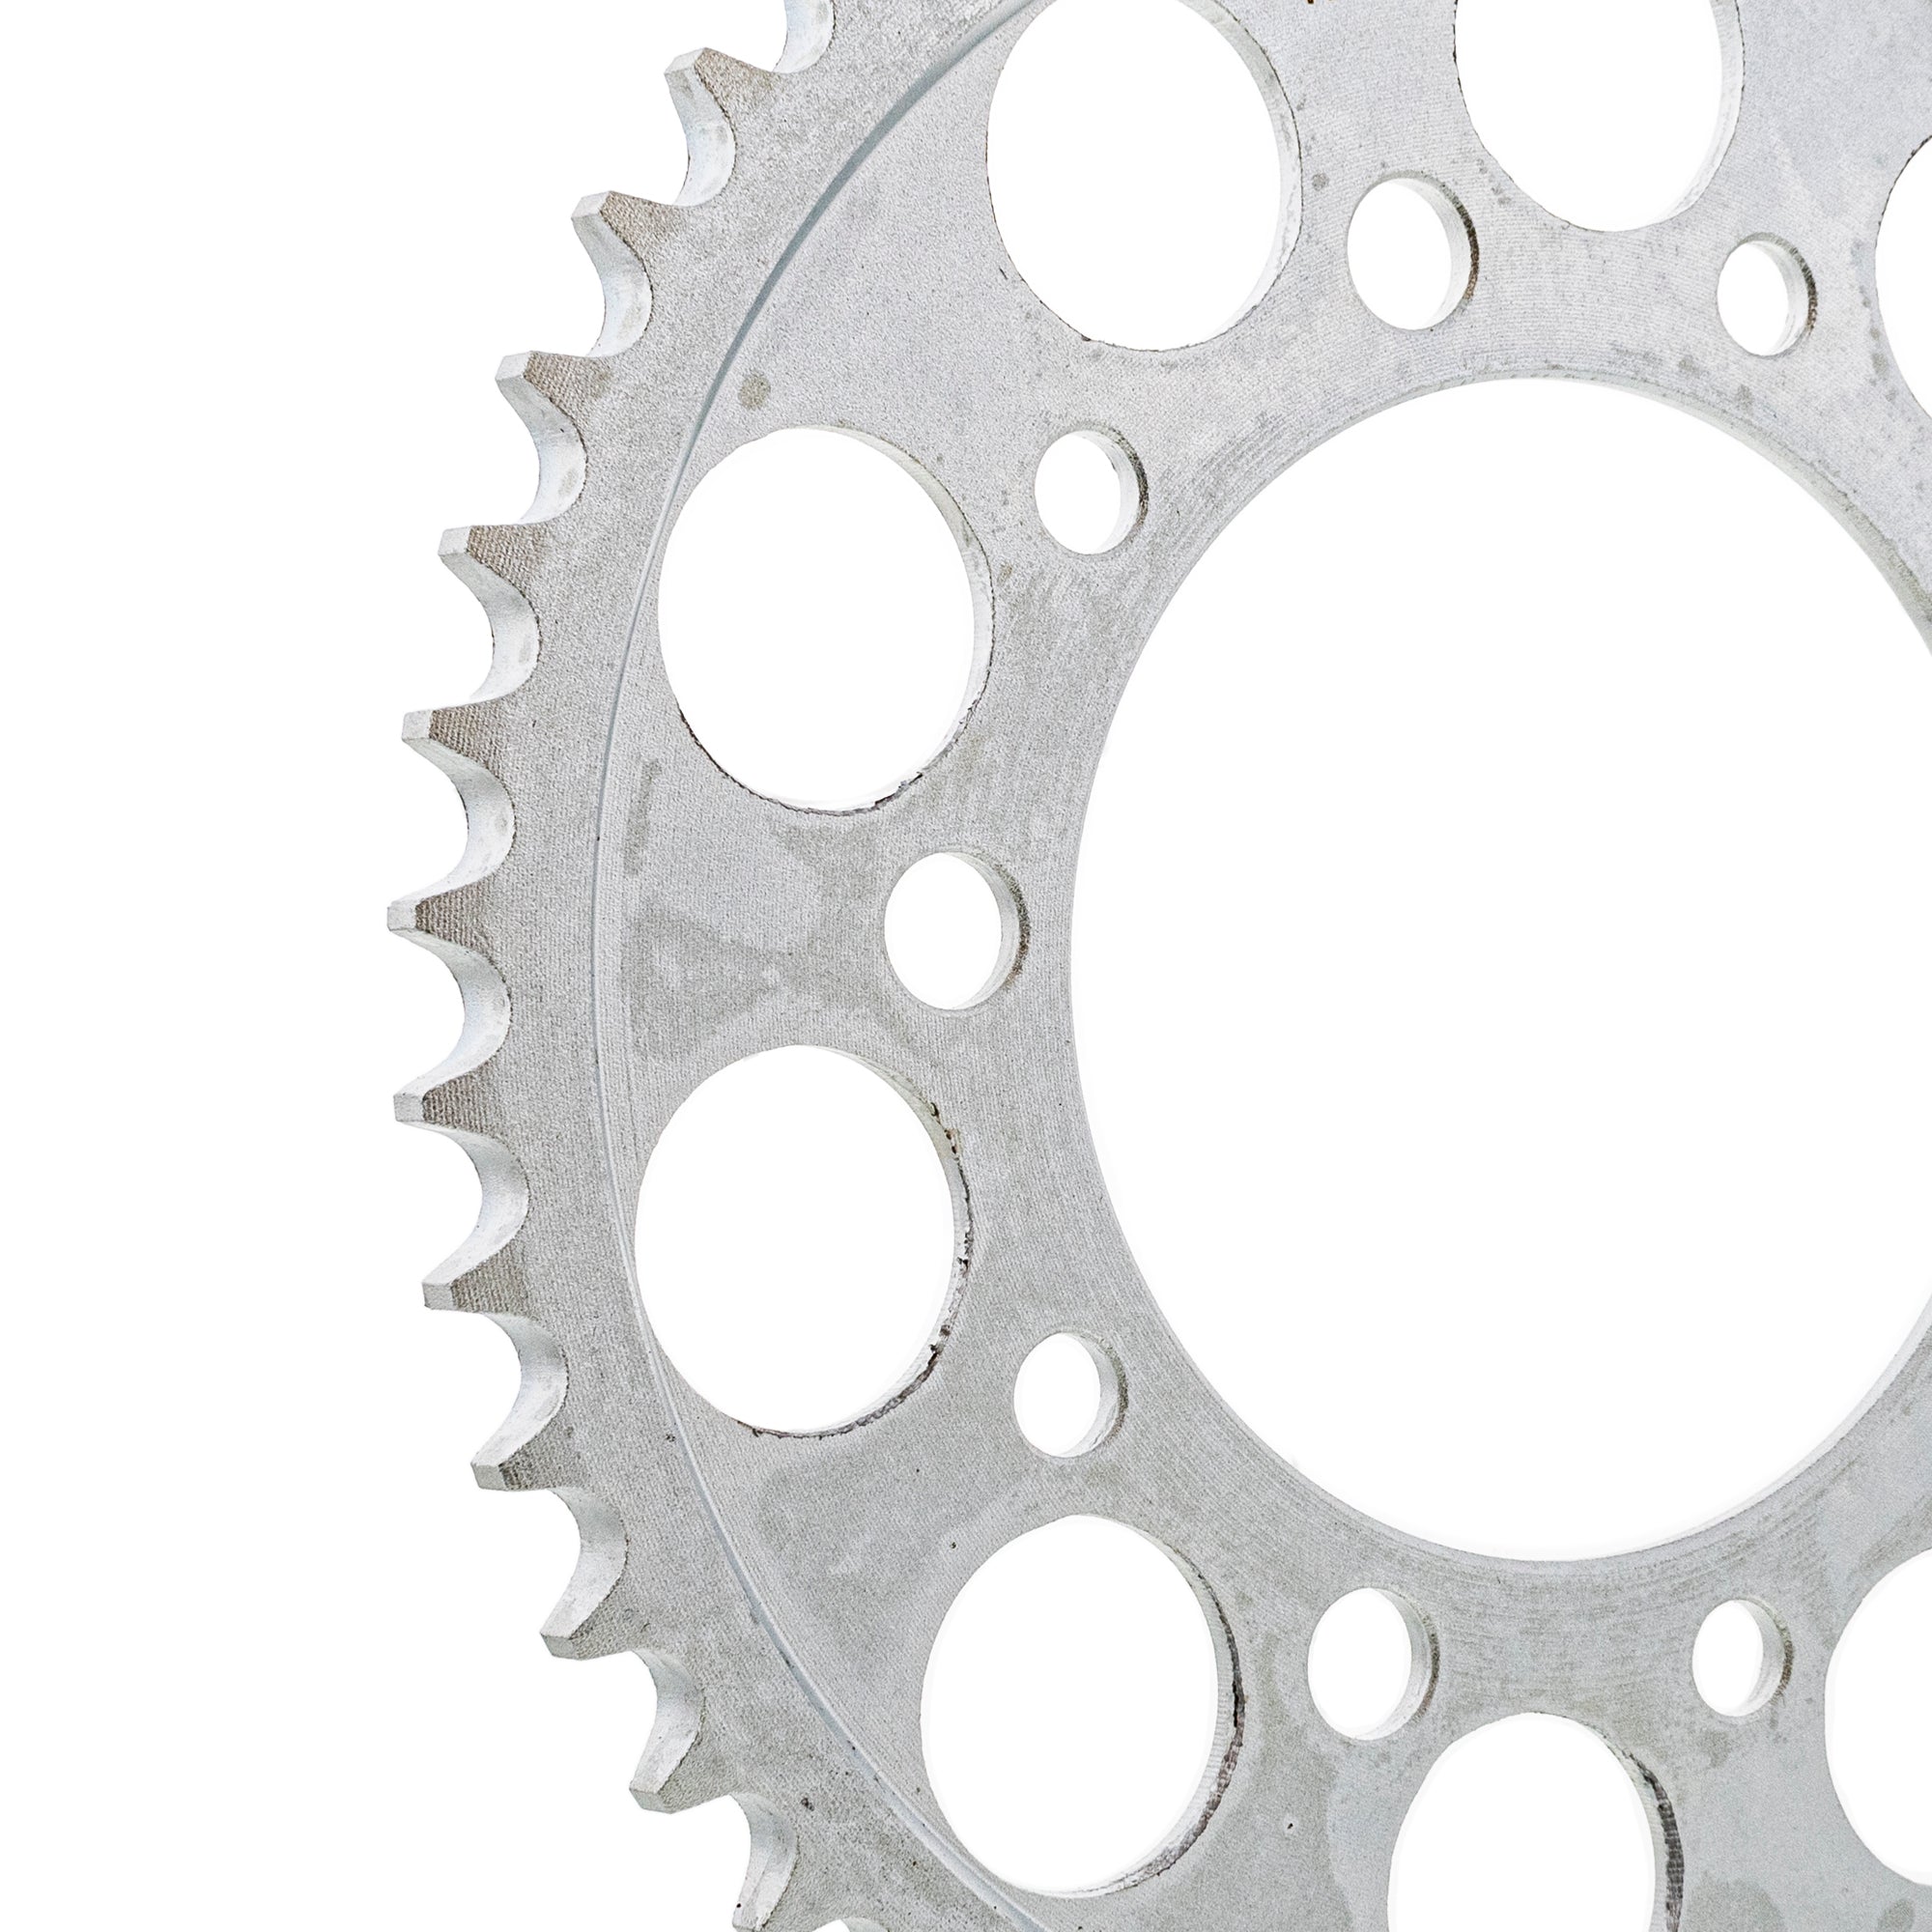 Tooth Rear Drive Sprocket For Yamaha